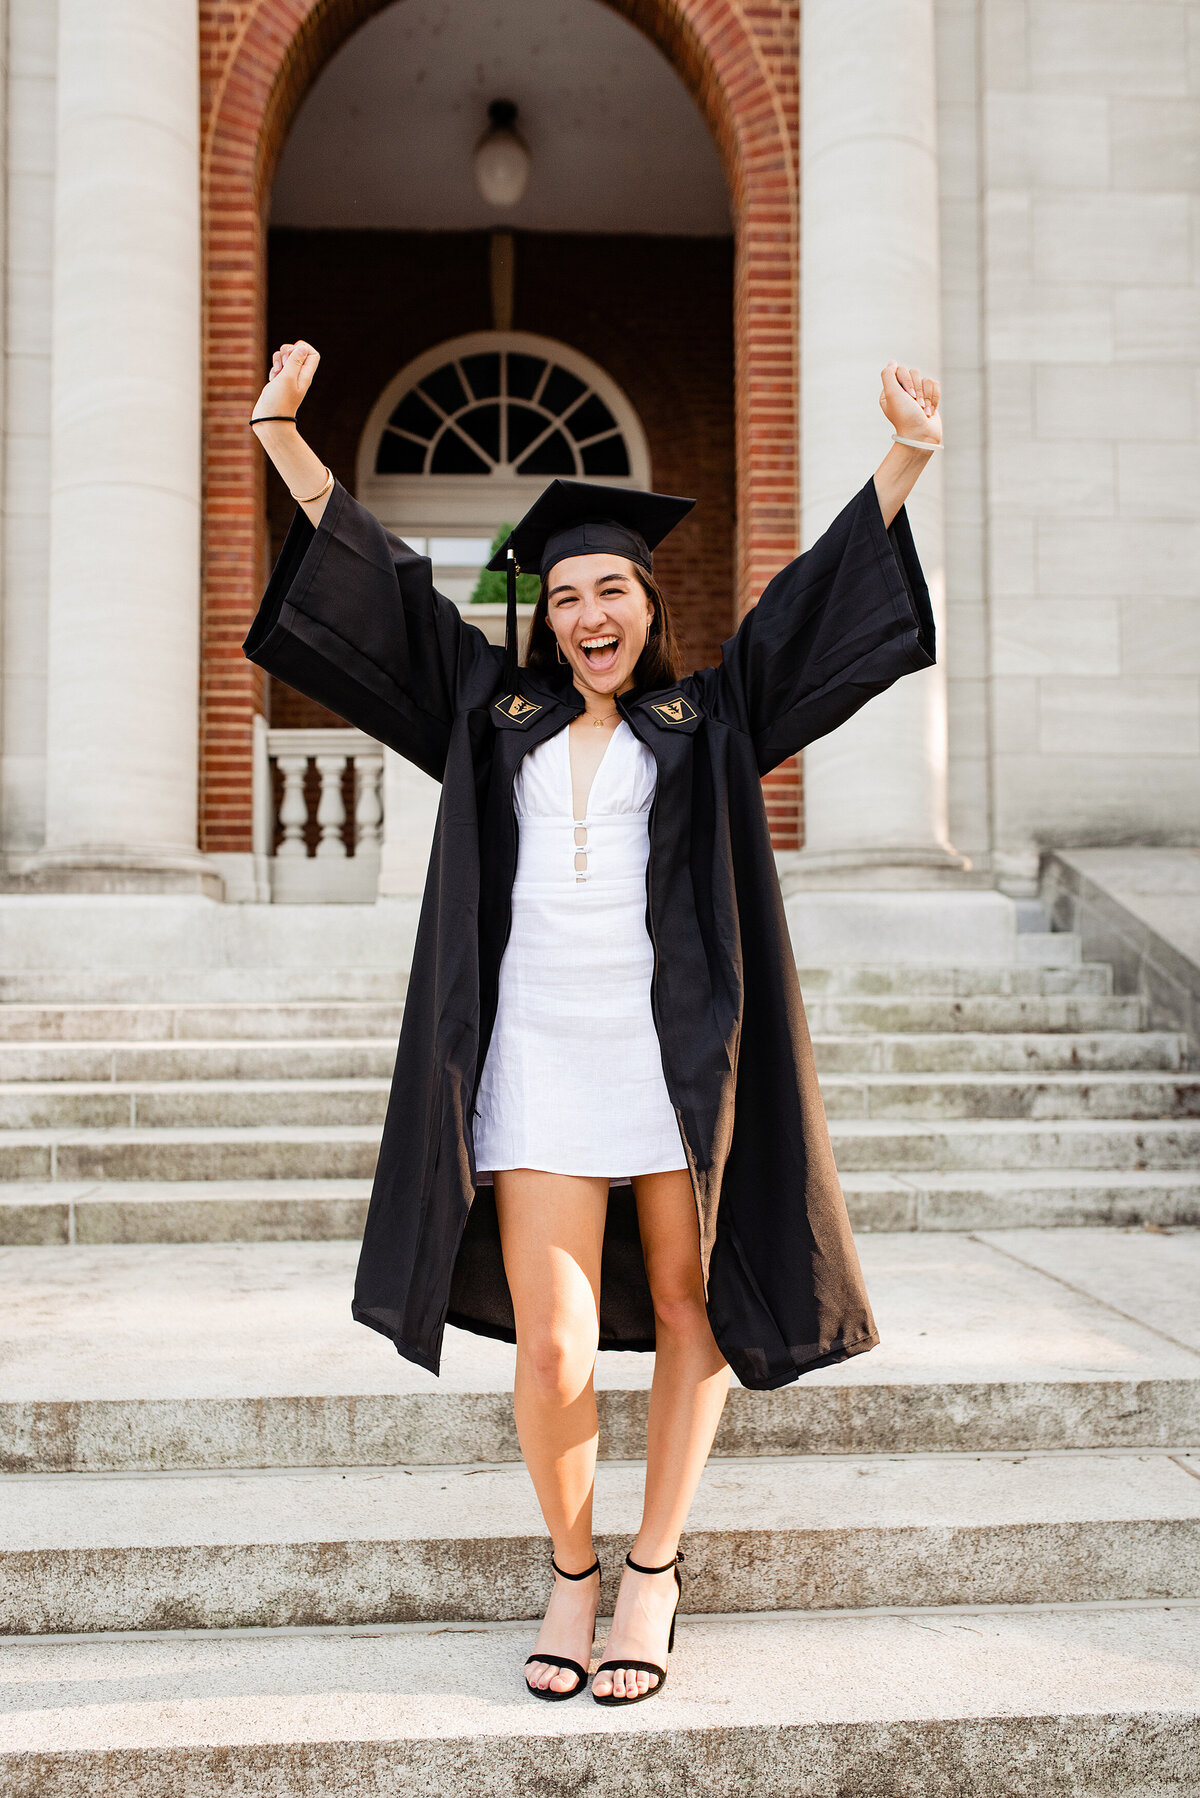 Vanderbilt senior wearing cap and gown celebrating with arms in the air